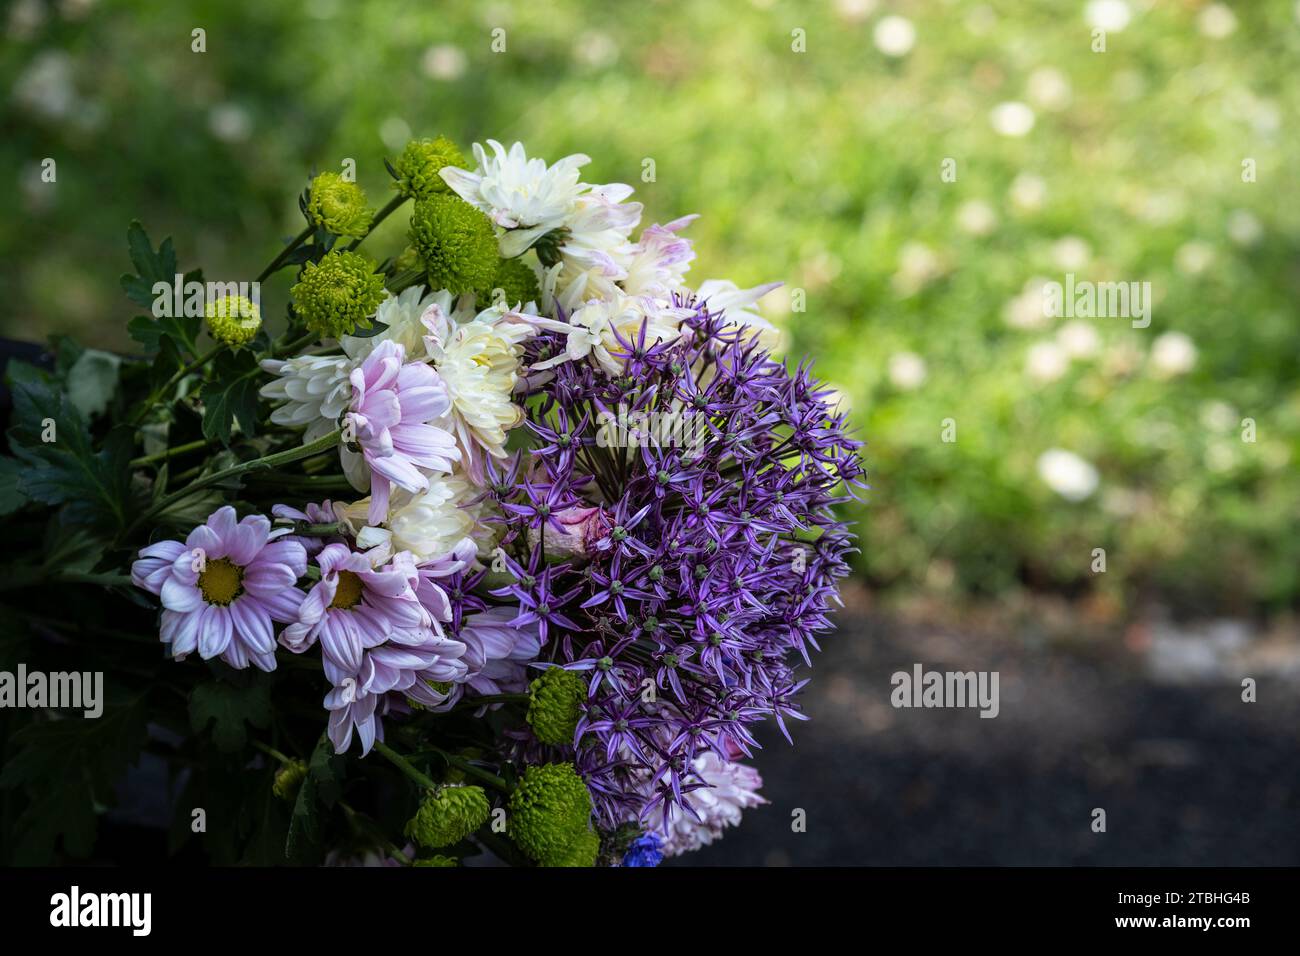 Various flowers in a bouquet. Stock Photo